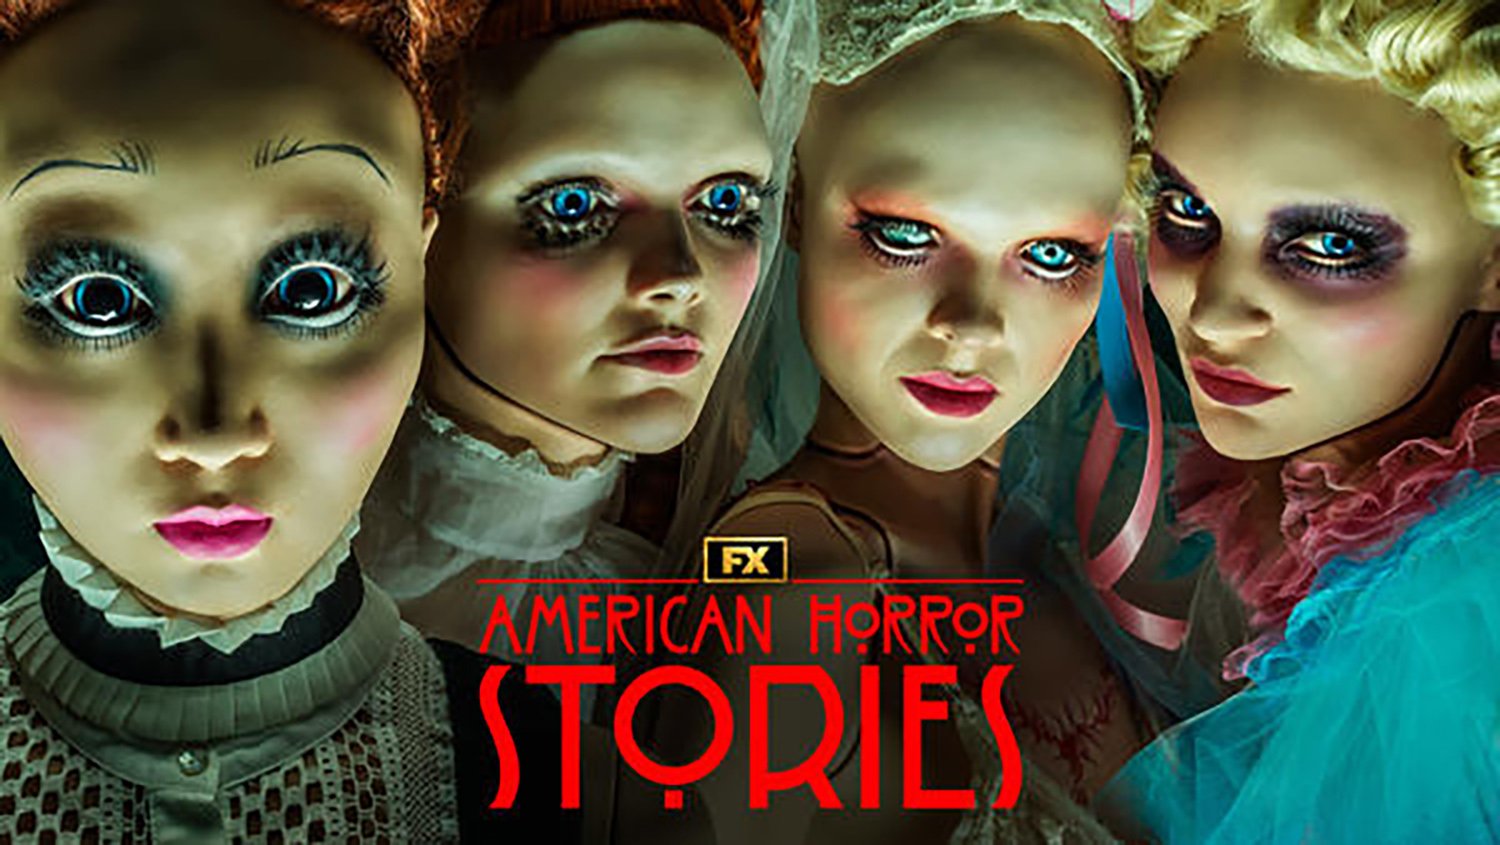 Three doll-like humans stare ahead in key art for the American Horror Stories Season 2 premiere